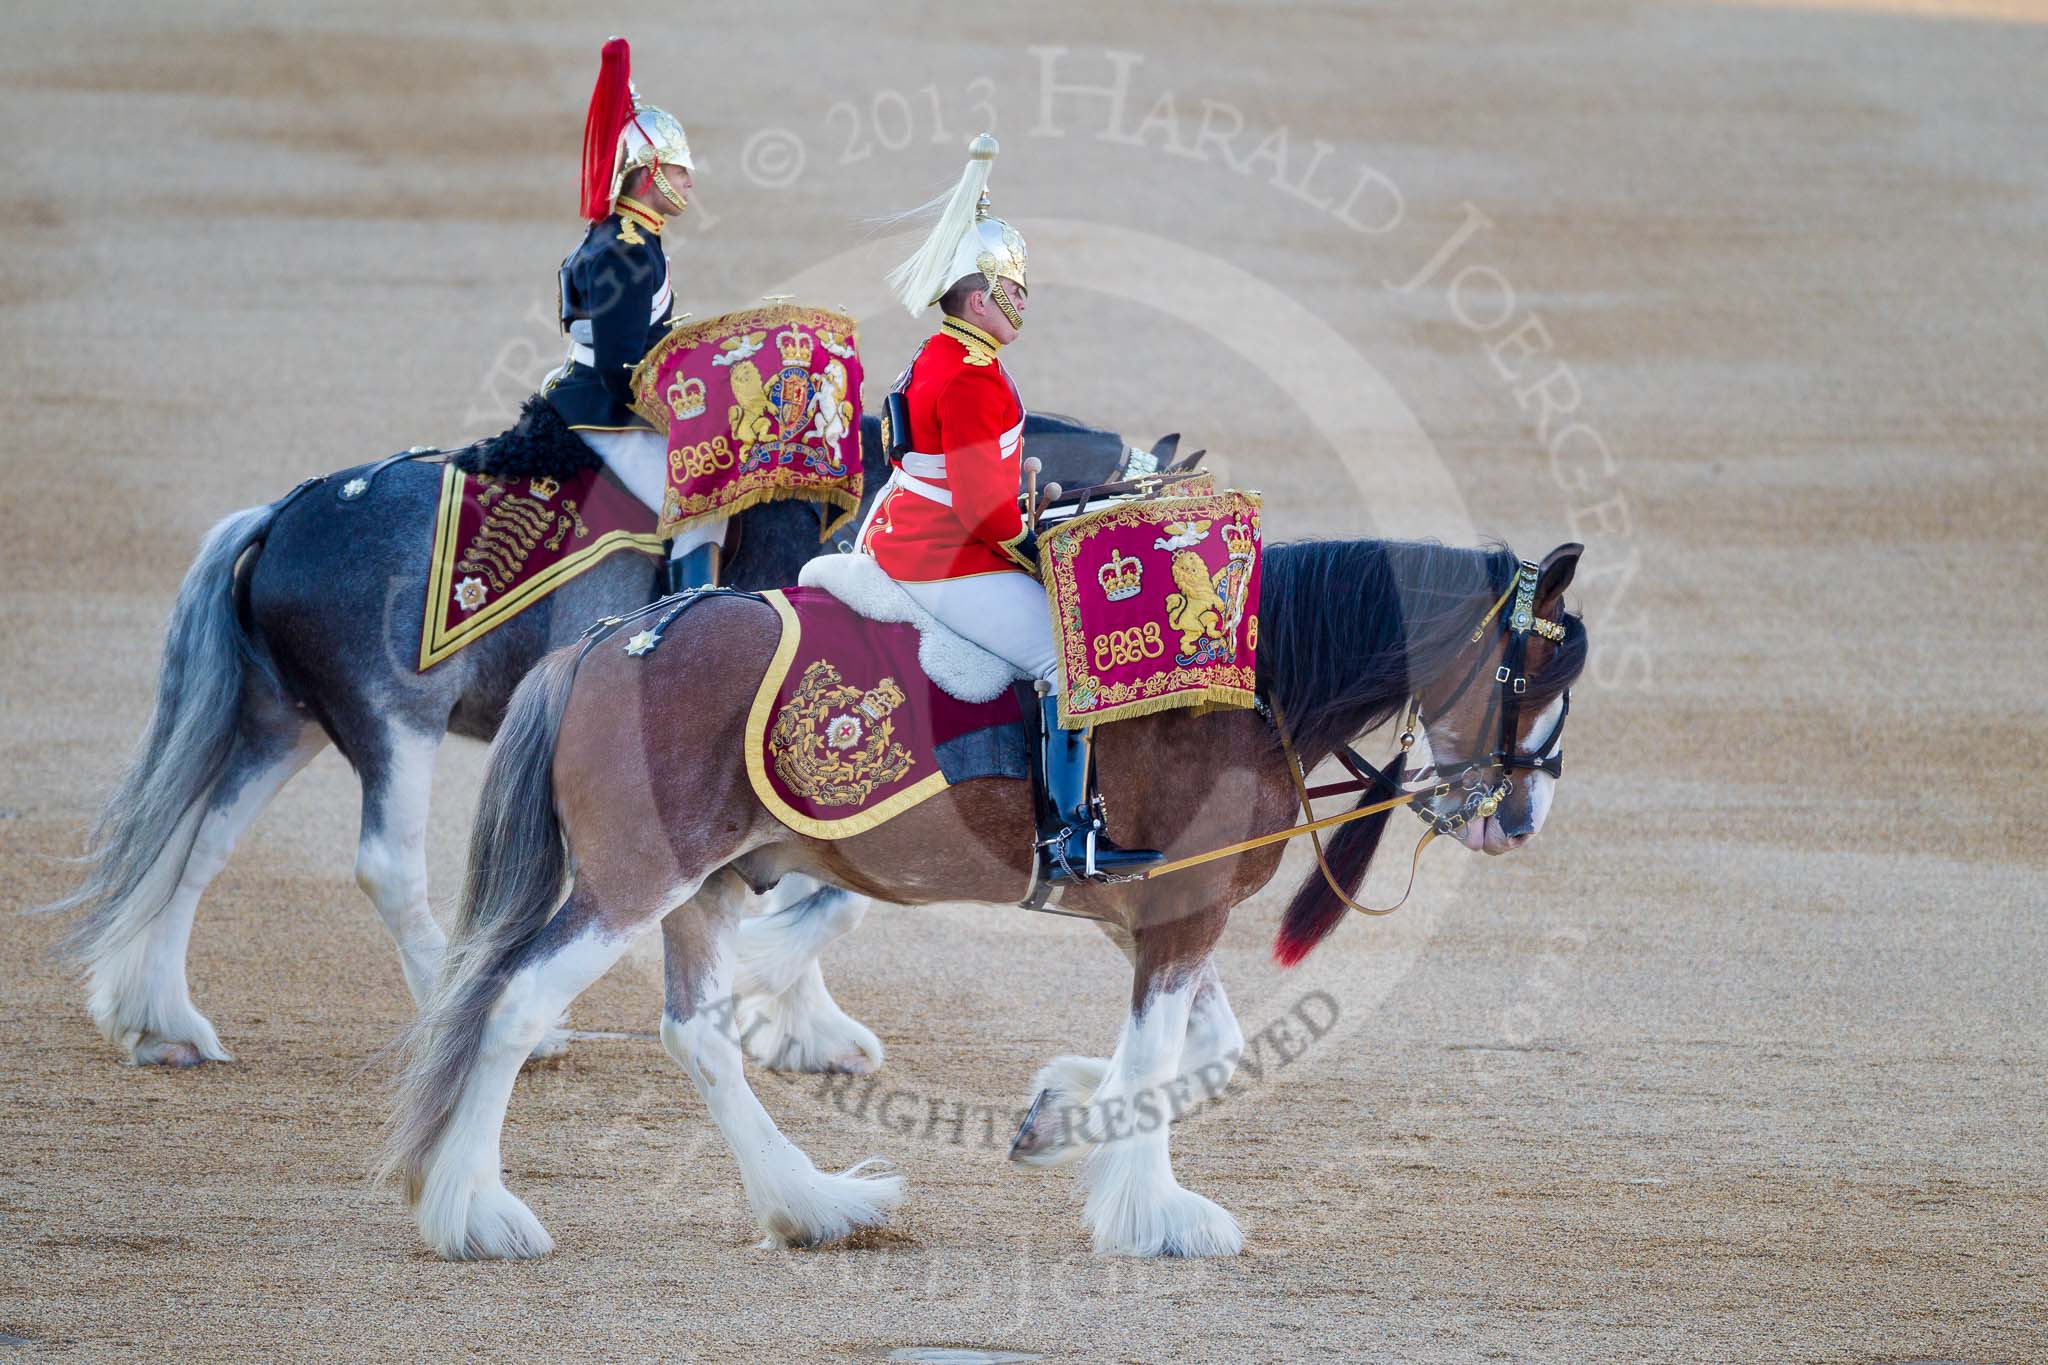 Beating Retreat 2015 - Waterloo 200.
Horse Guards Parade, Westminster,
London,

United Kingdom,
on 10 June 2015 at 20:06, image #82